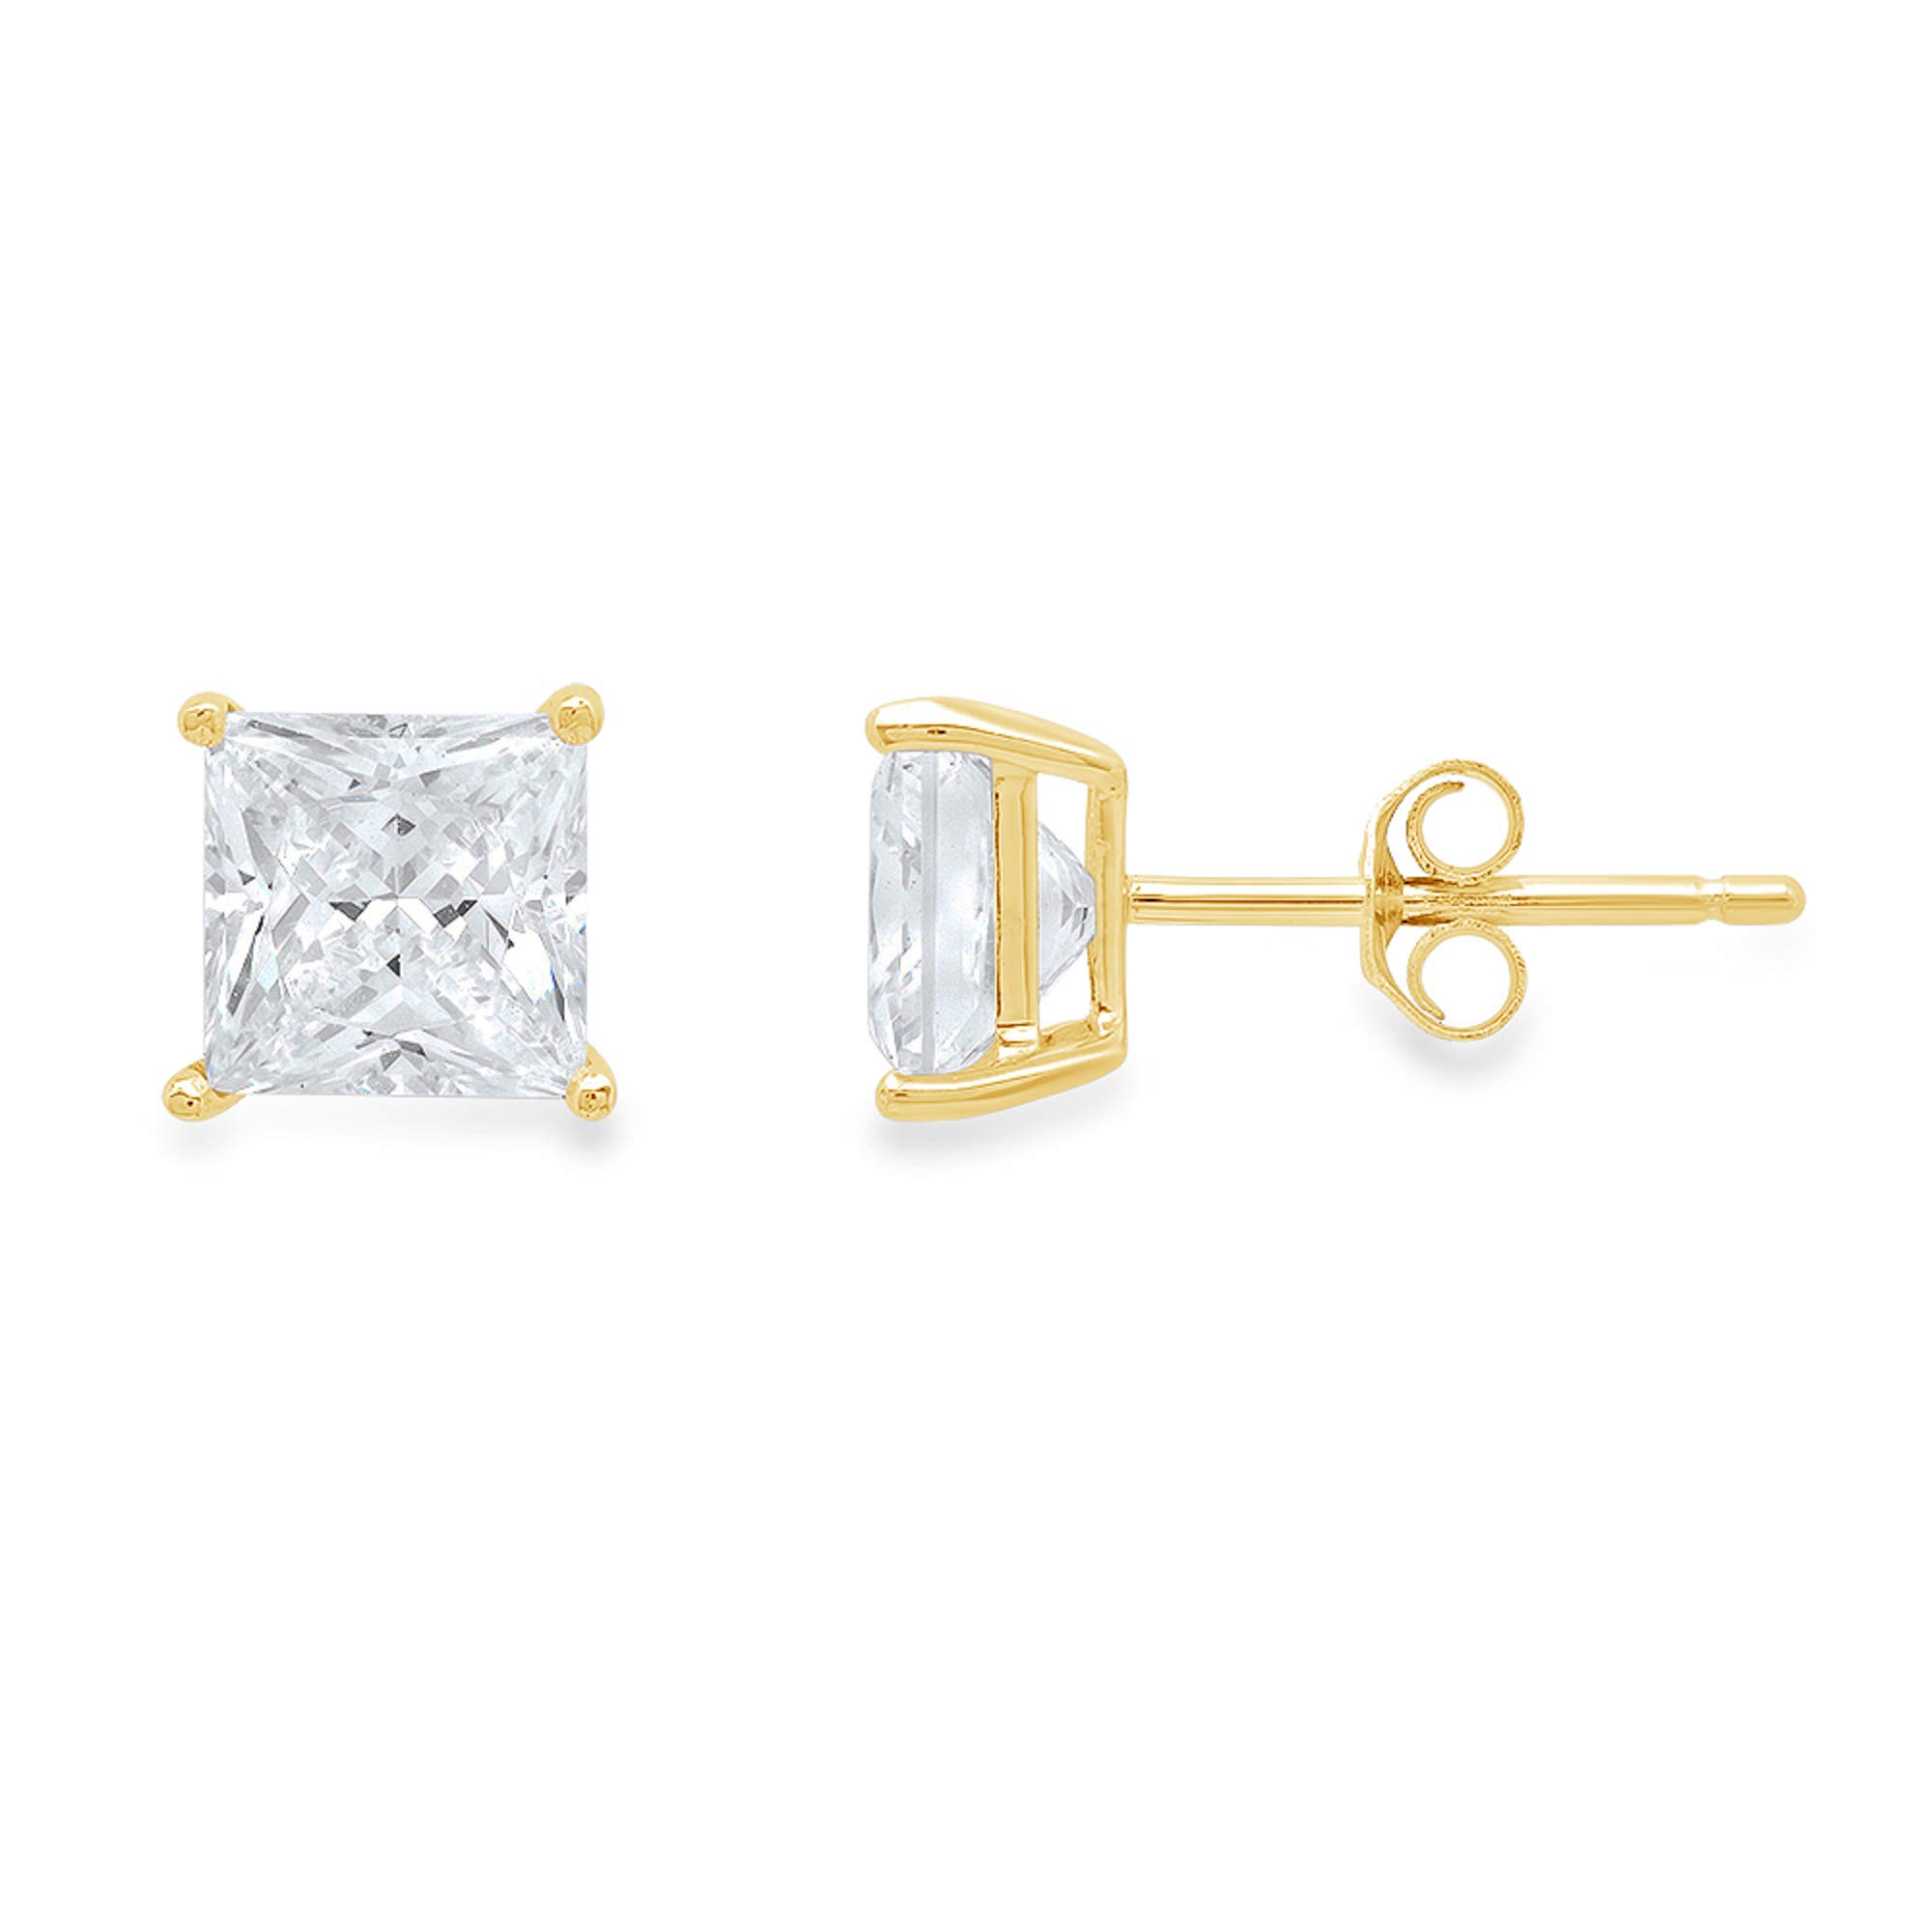 3.9ct Princess Cut Solitaire Genuine White Created Sapphire Unisex Designer Stud Earrings Solid 14k Yellow Gold Push Back conflict free Jewelry